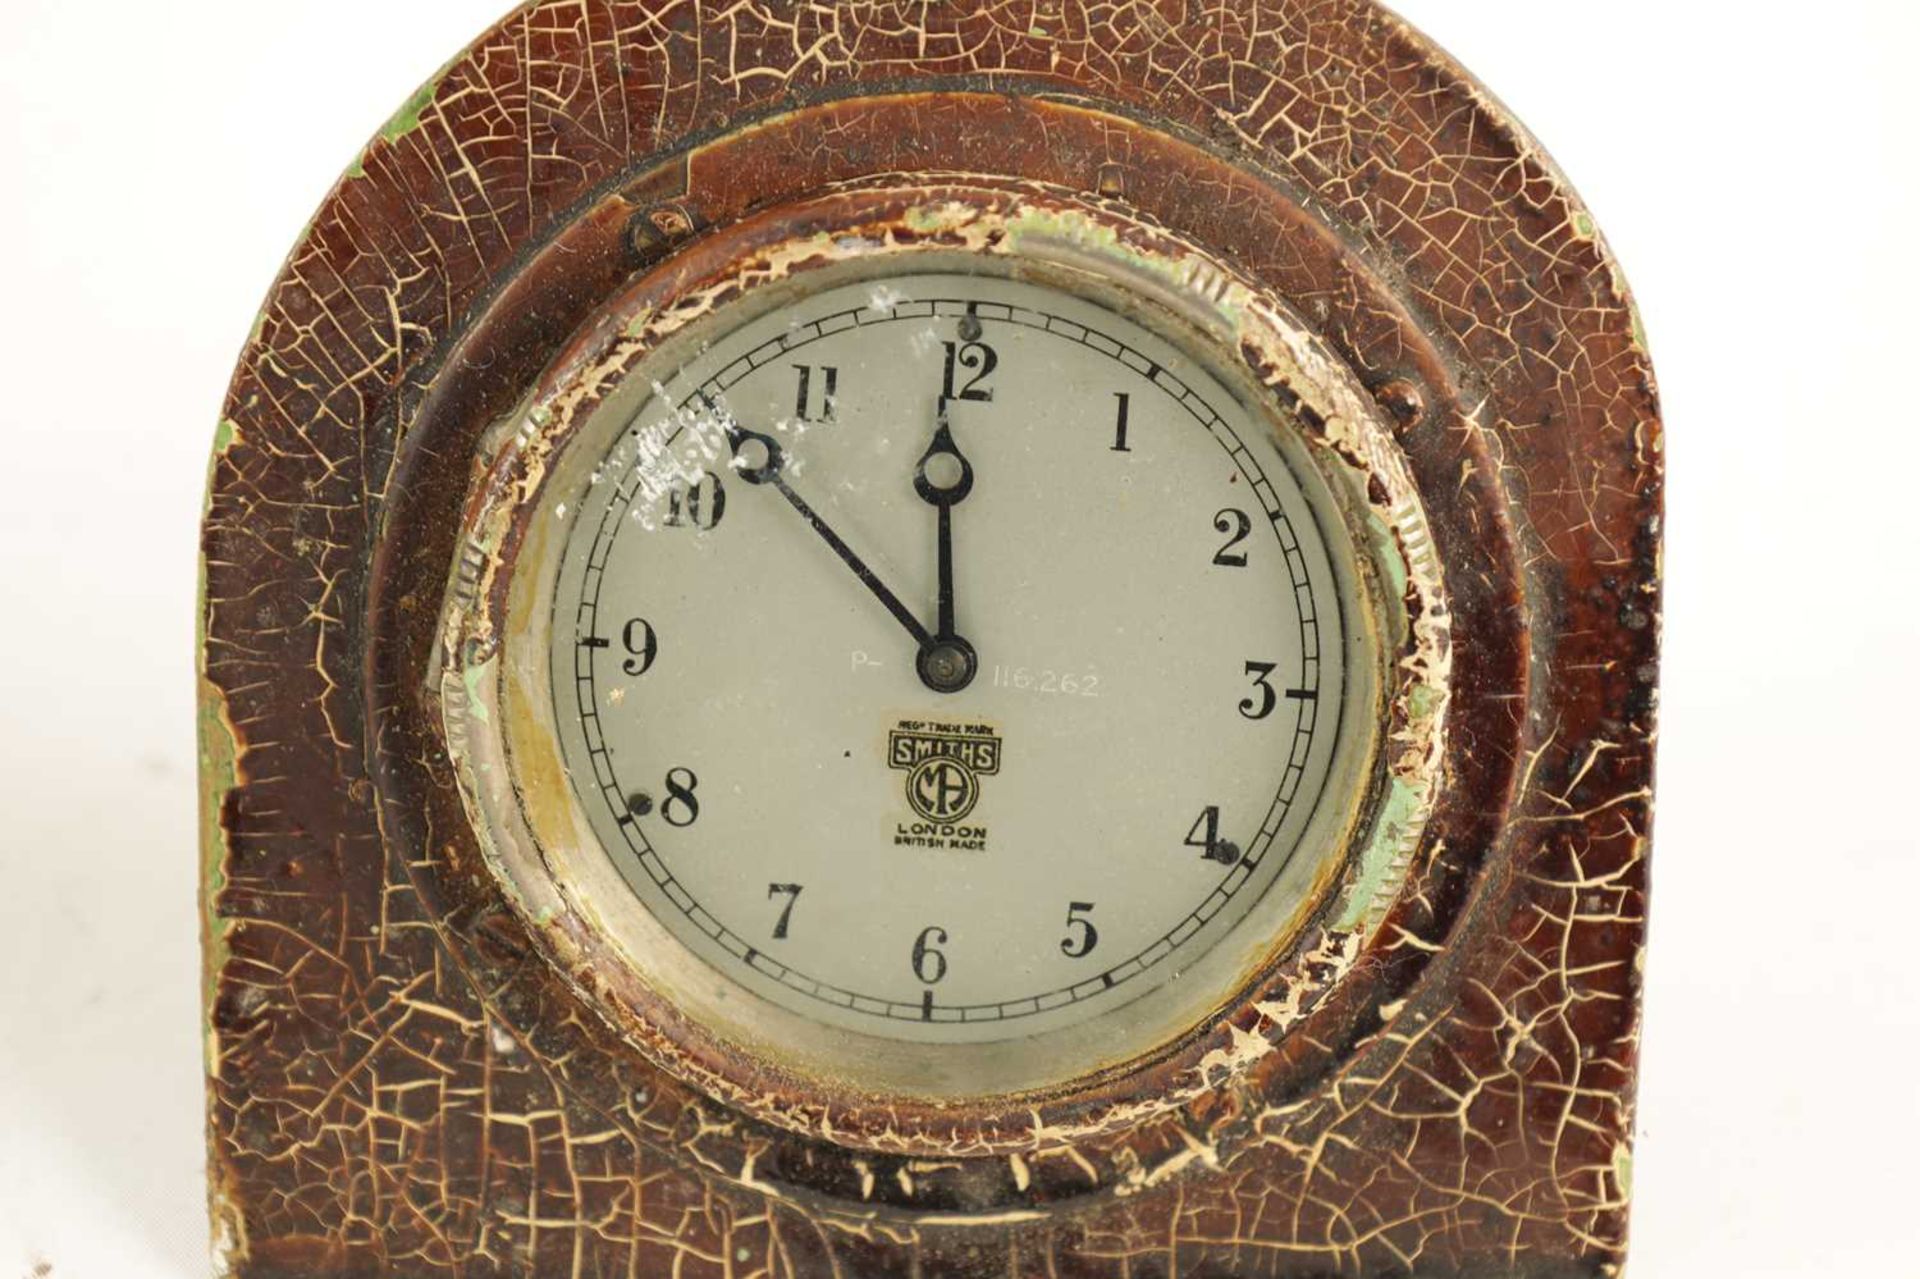 A 1920S SMITHS INSTRUMENT PANEL CLOCK - Image 2 of 5